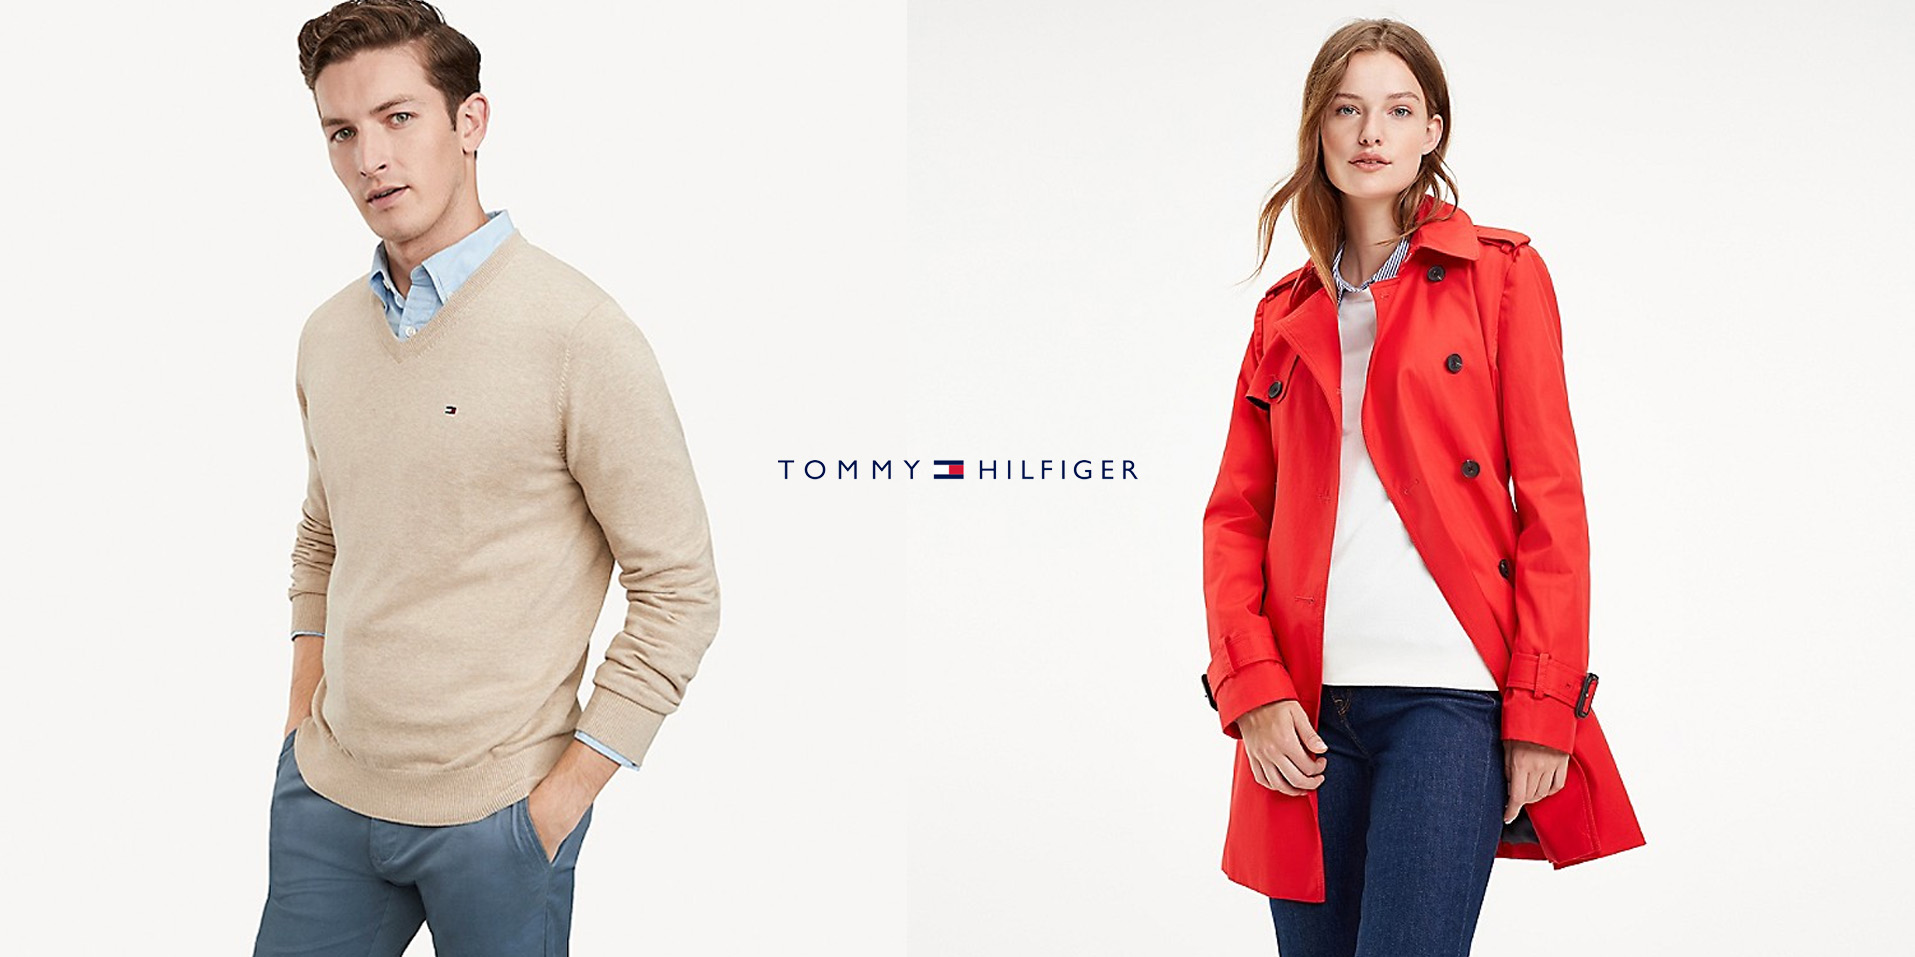 tommy hilfiger blue and white jacket